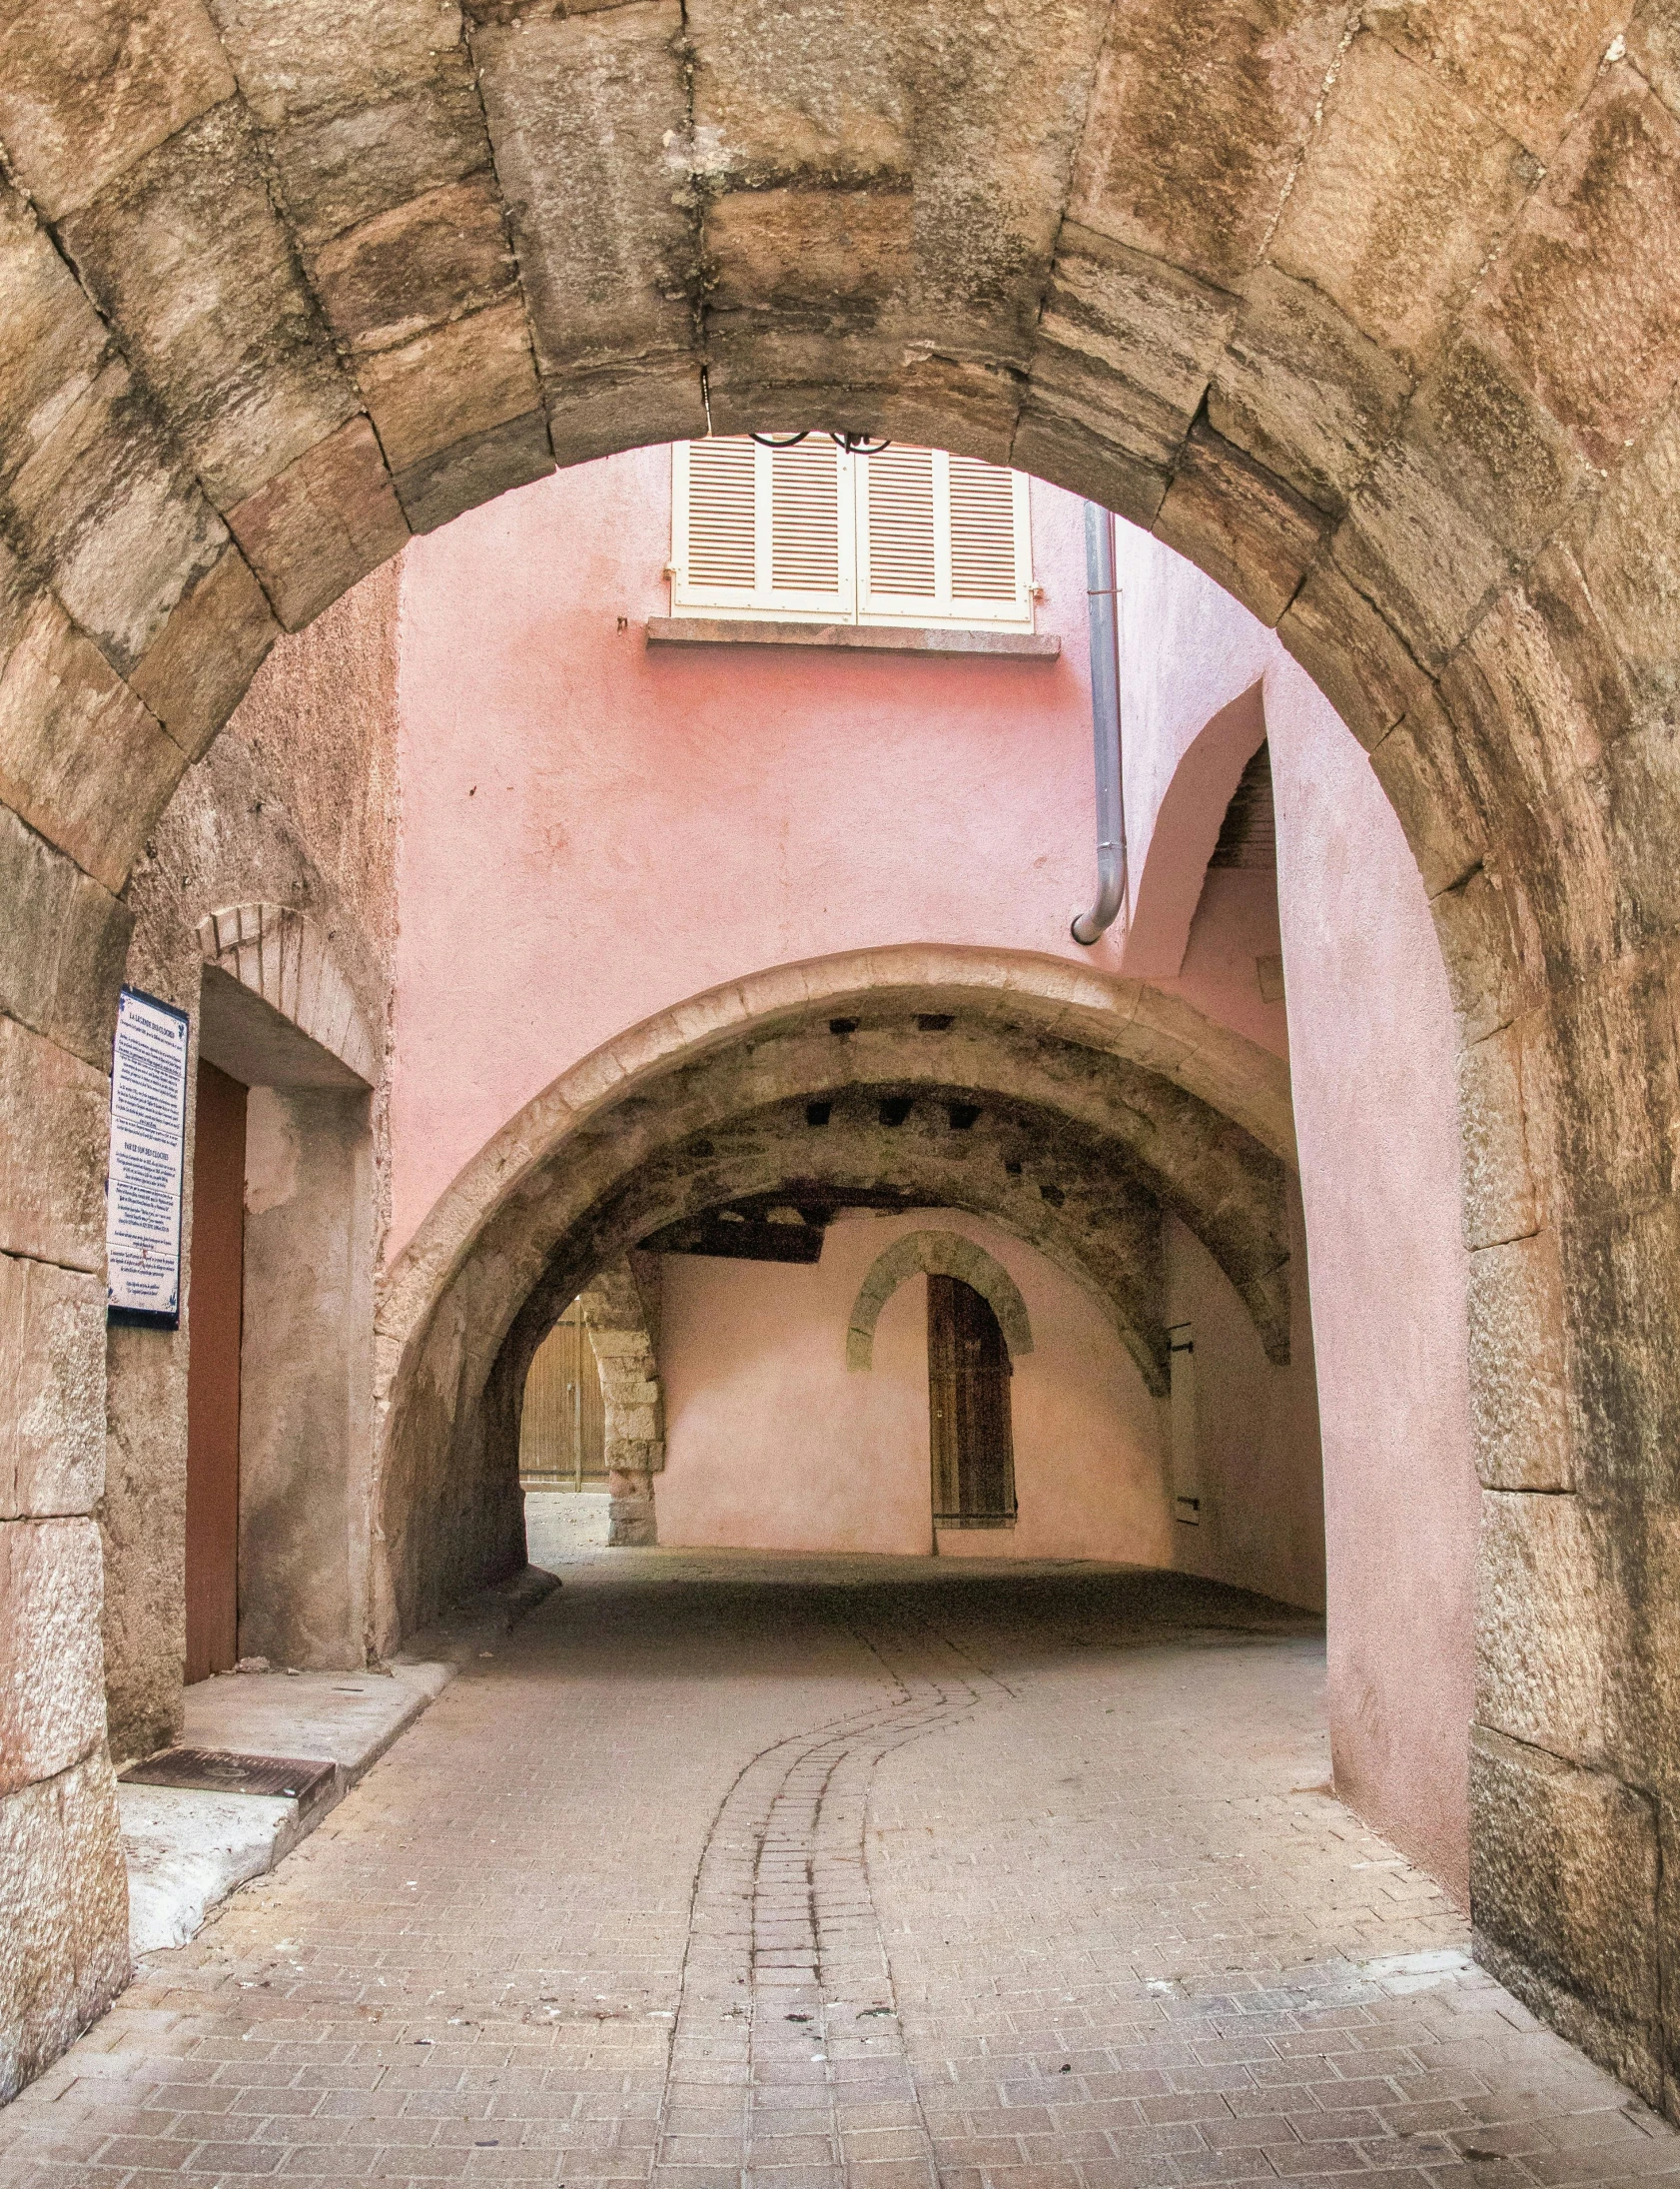 an archway to another area of the building